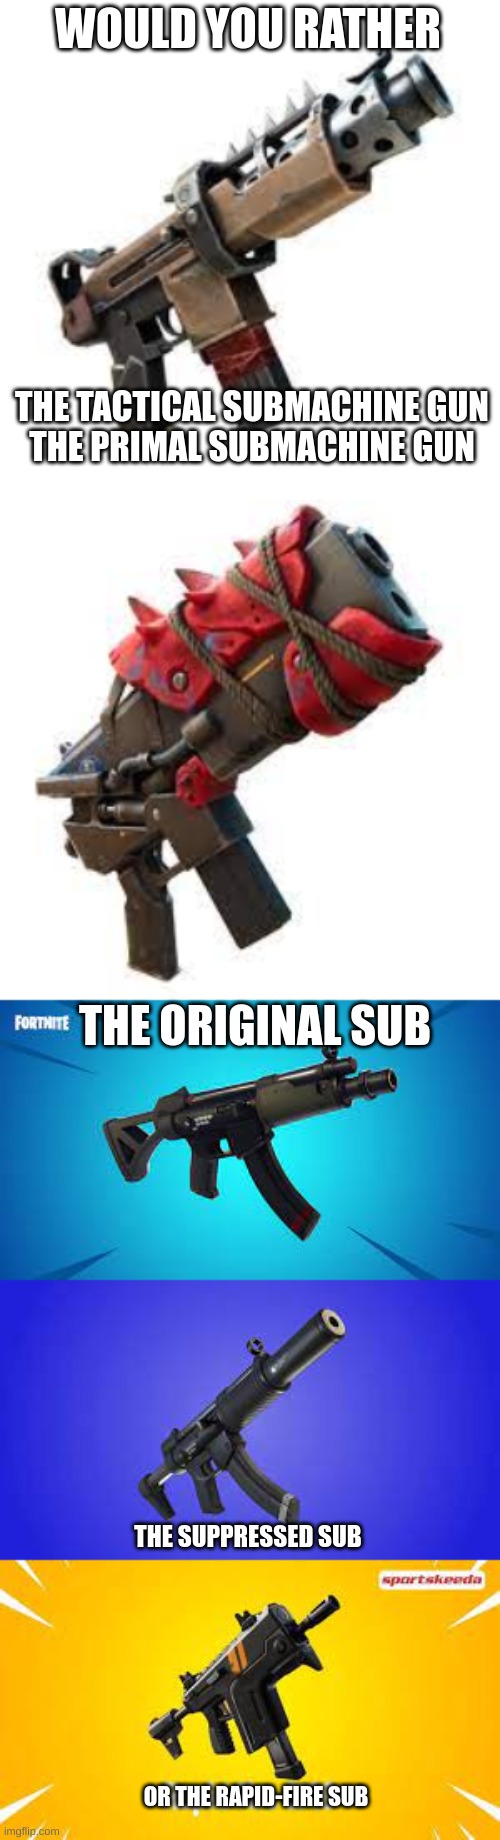 WOULD YOU RATHER; THE TACTICAL SUBMACHINE GUN
THE PRIMAL SUBMACHINE GUN; THE ORIGINAL SUB; THE SUPPRESSED SUB; OR THE RAPID-FIRE SUB | image tagged in fortnite | made w/ Imgflip meme maker